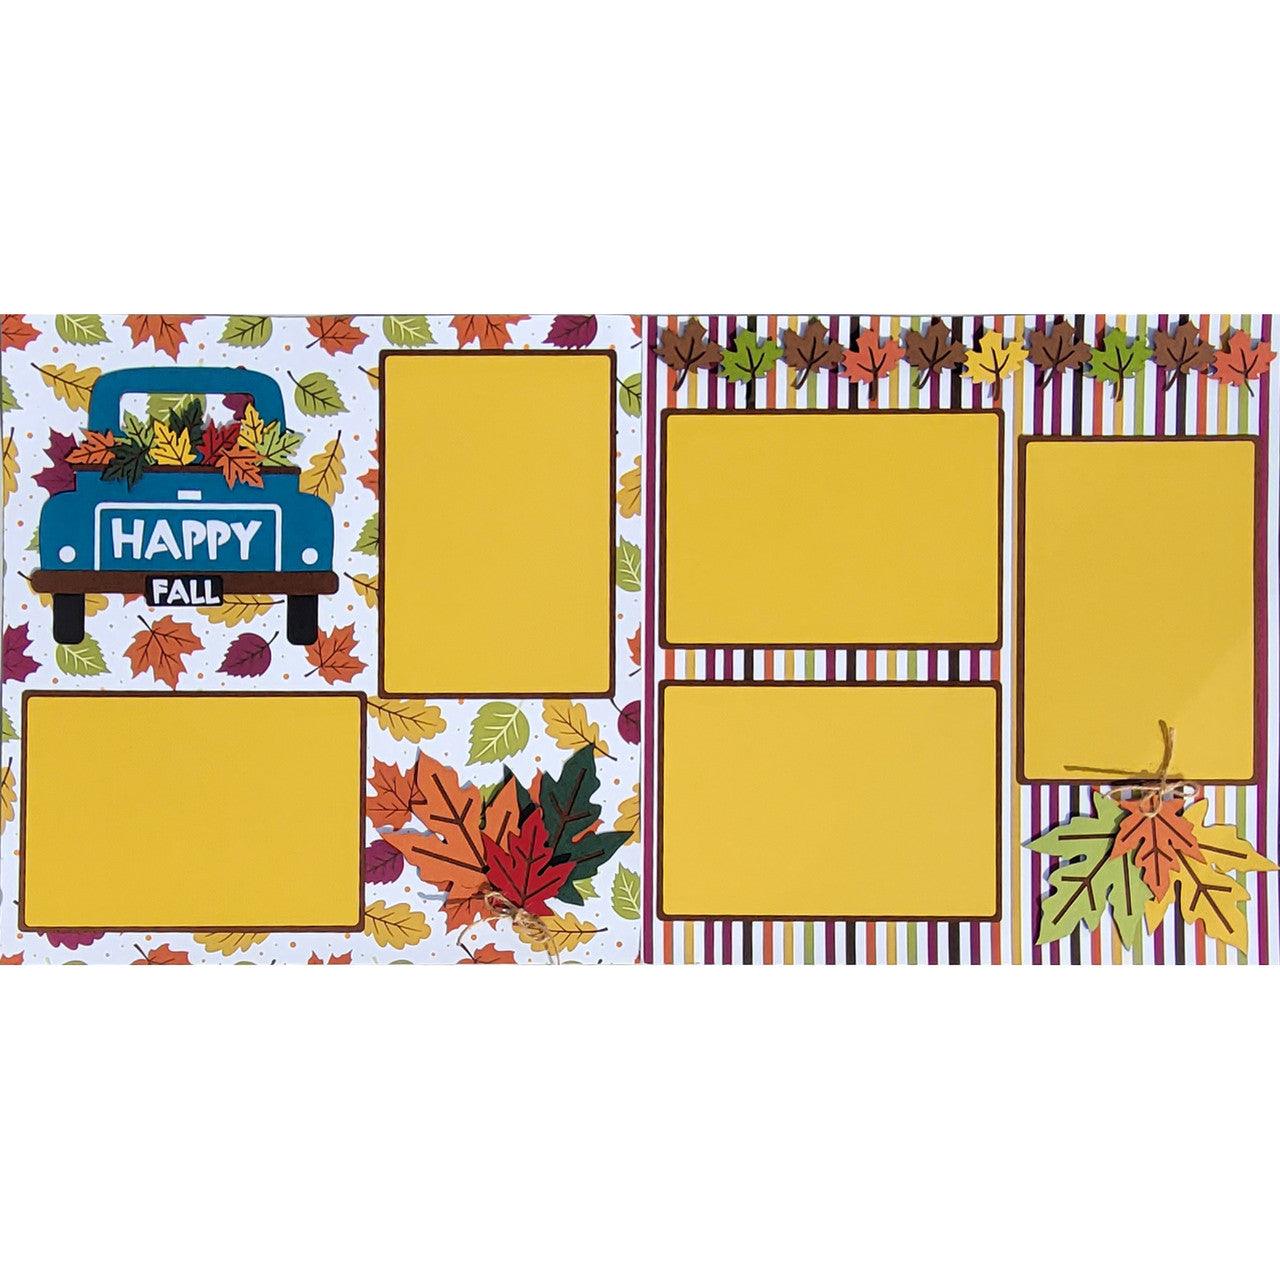 Falling Leaves (2) - 12 x 12 Pages, Fully-Assembled & Hand-Crafted 3D Scrapbook Premade by SSC Designs